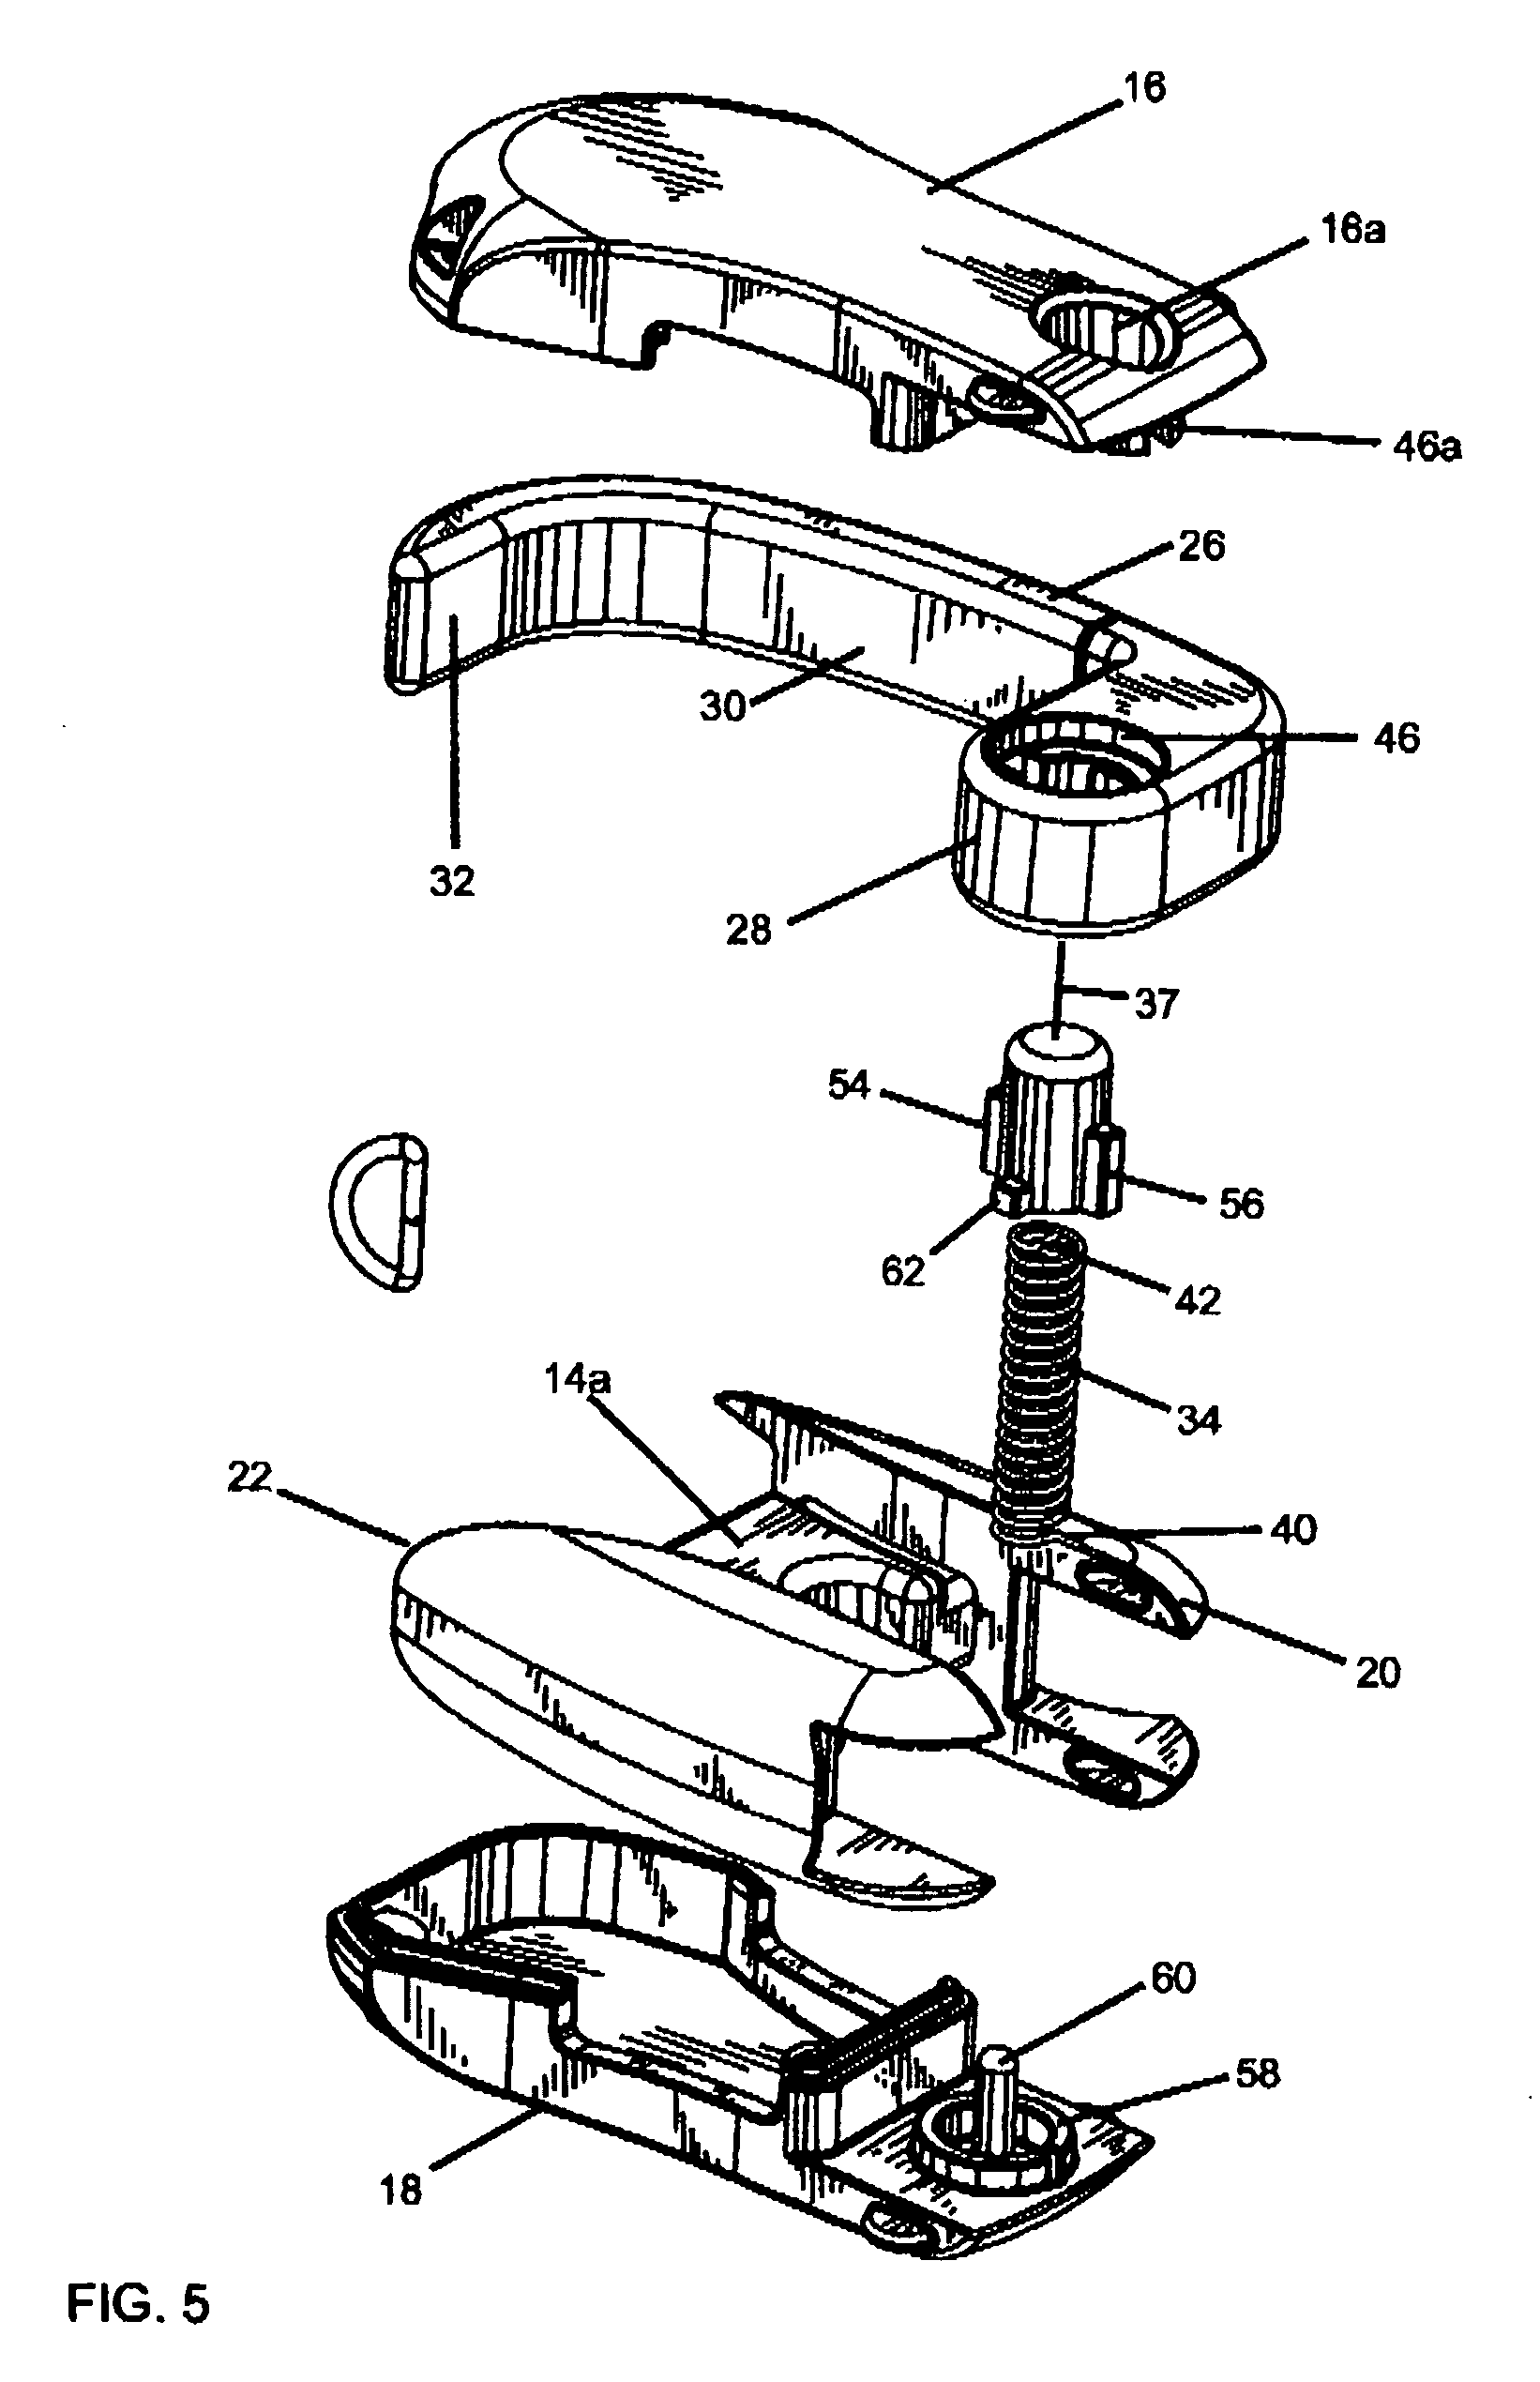 Article grasping device